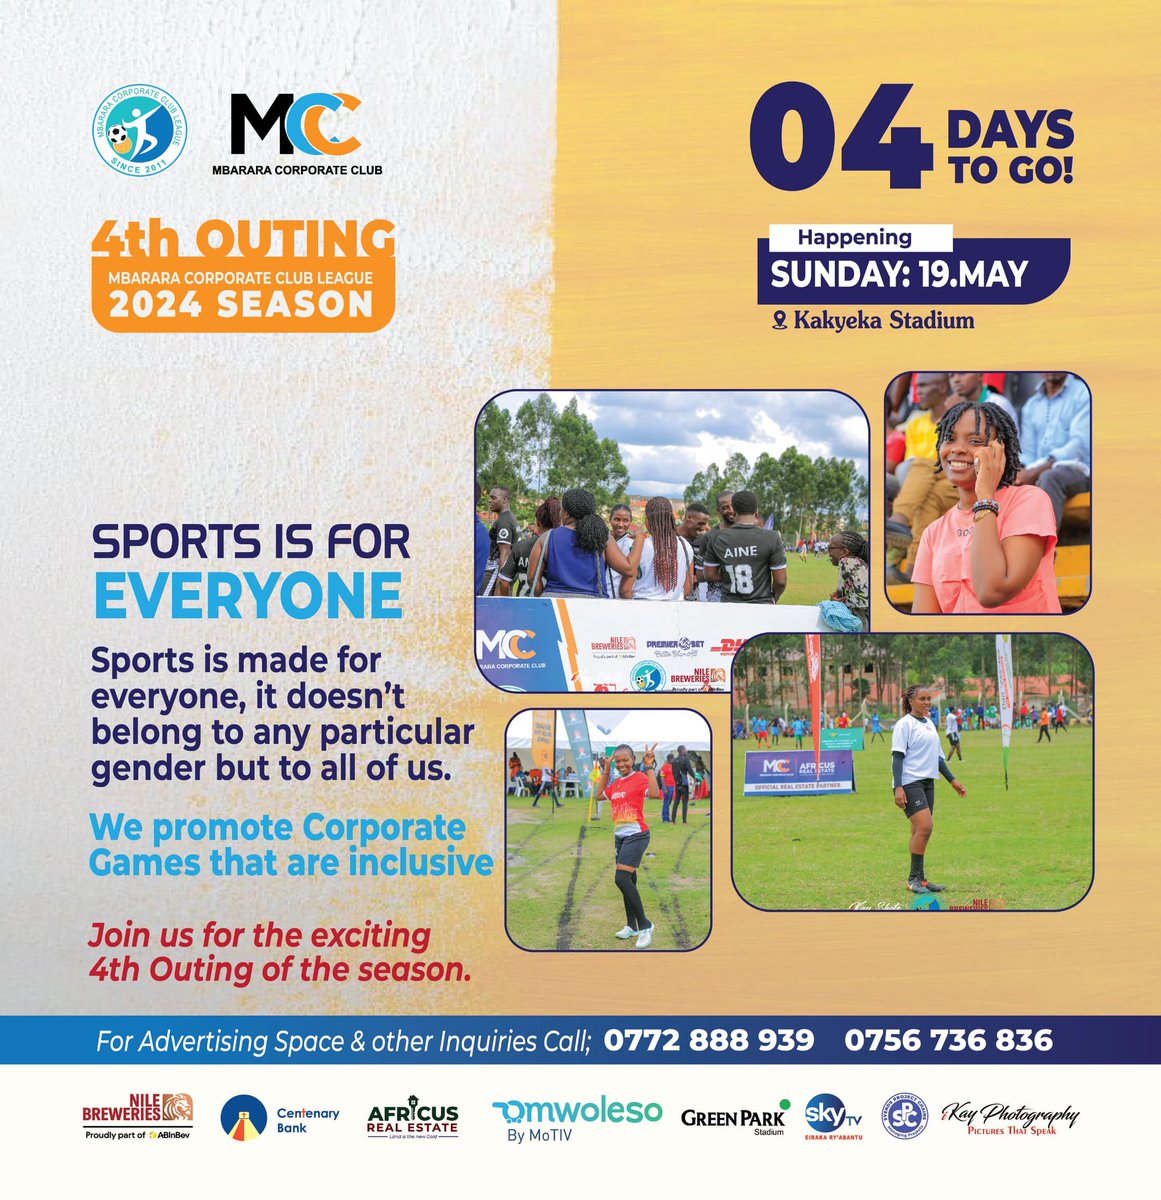 4 DAYS LEFT
We promote gender inclusiveness in the corporate games!
Don't miss eye catching moments as ladies tussle it out with men during the Mbra Corporate Club League 4th Outing this Sunday at Kakyeka Stadium.
19th May,2024📌
#MbraCorpLeagueFourthOuting 
#NBLMCCL2024Season